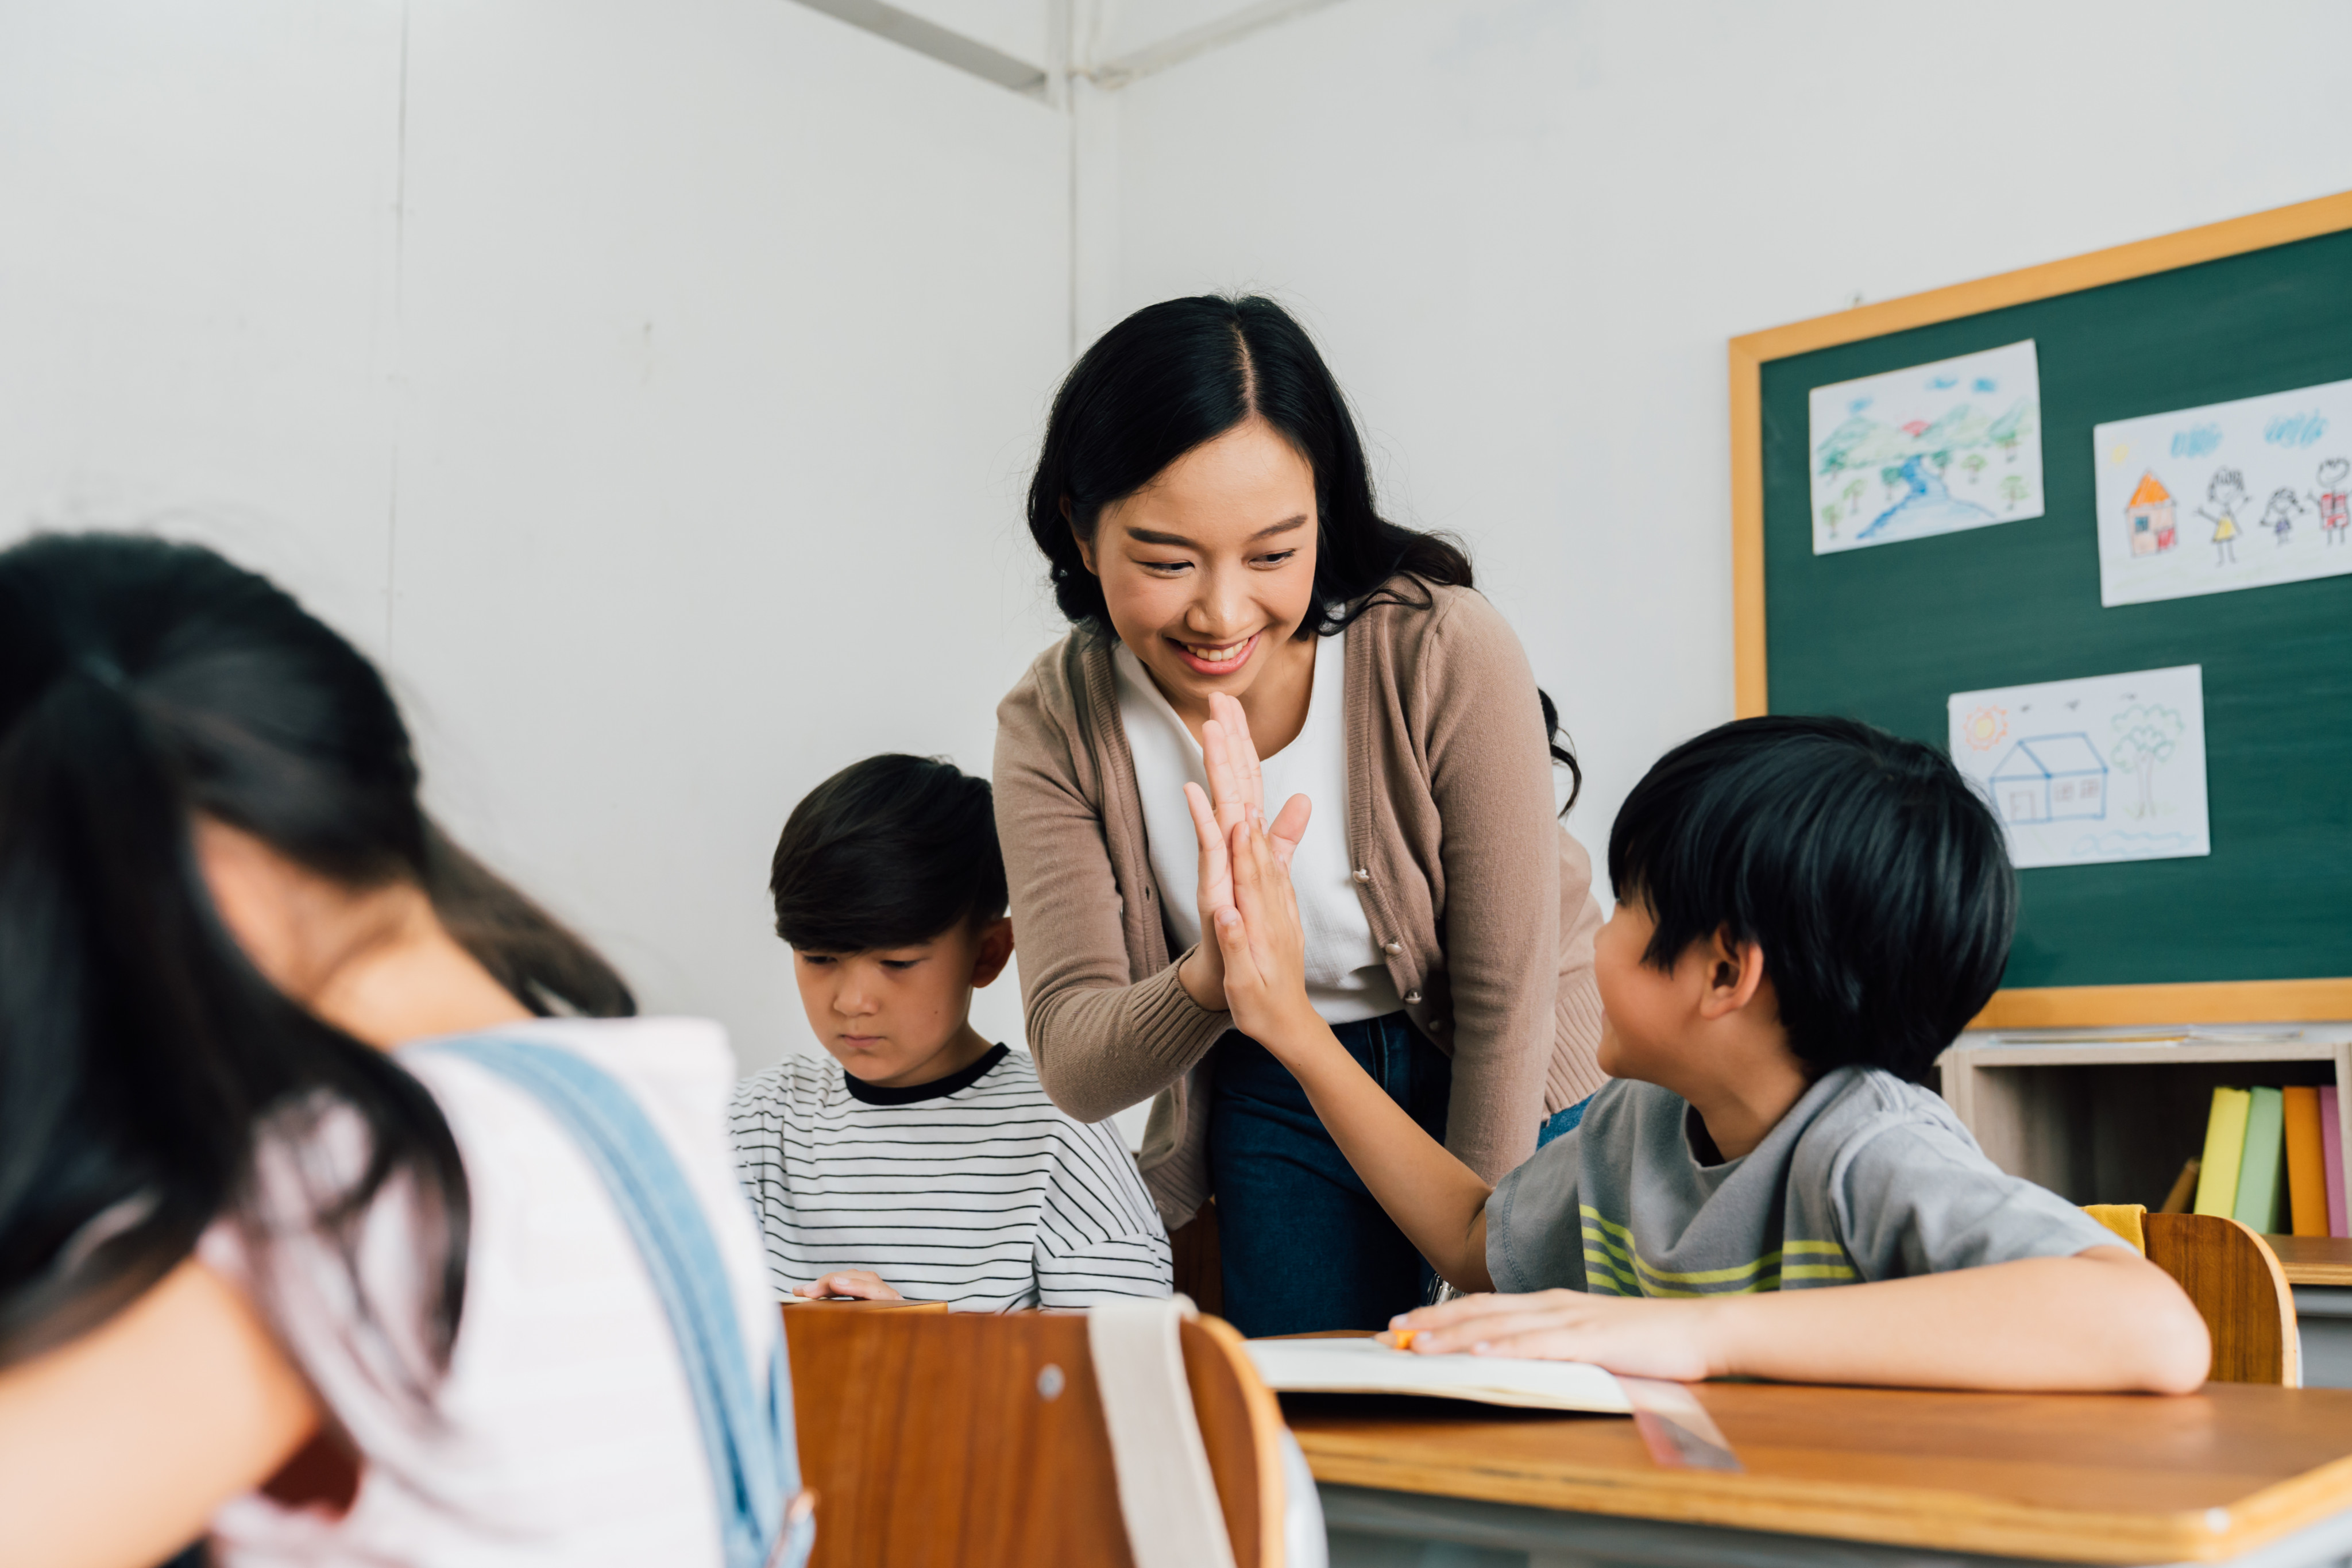 Some educators in China are feedback to students in the form of memes and cute drawings. Photo: Shutterstock